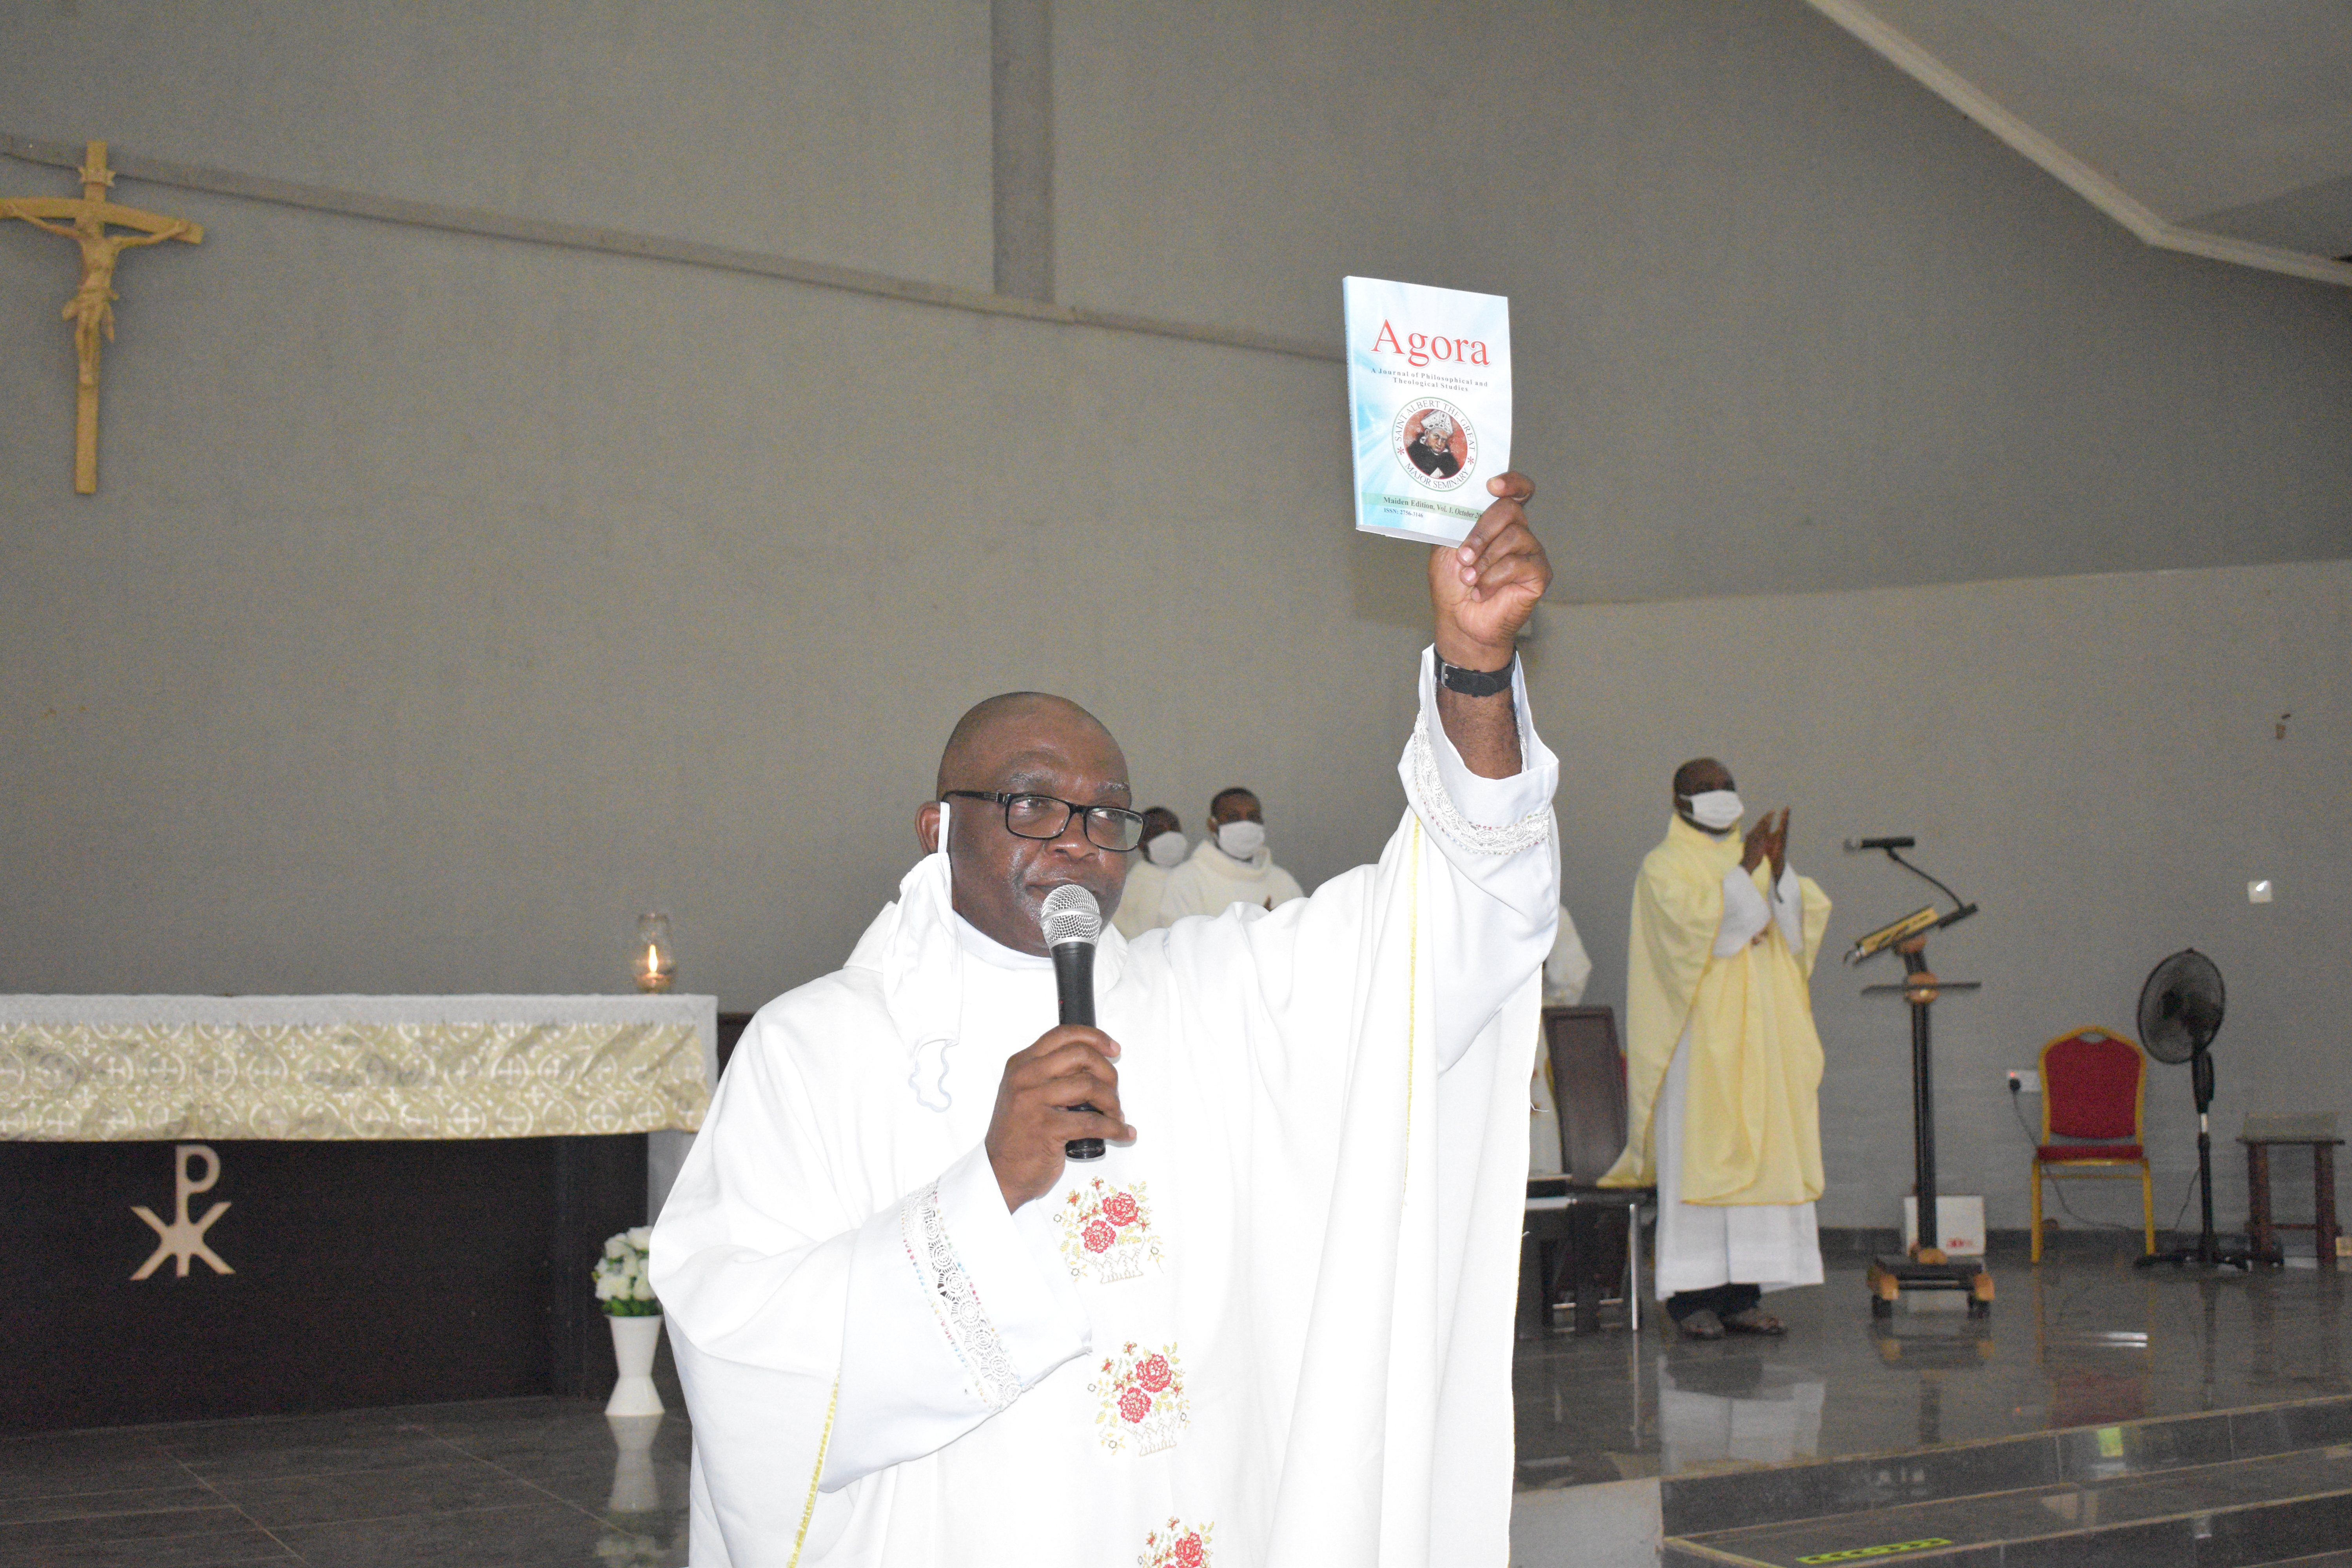 SEMINARY OF ST. ALBERT THE GREAT UNVEILS HER PUBLICATION OF AGORA MAGAZINE AND JOURNAL